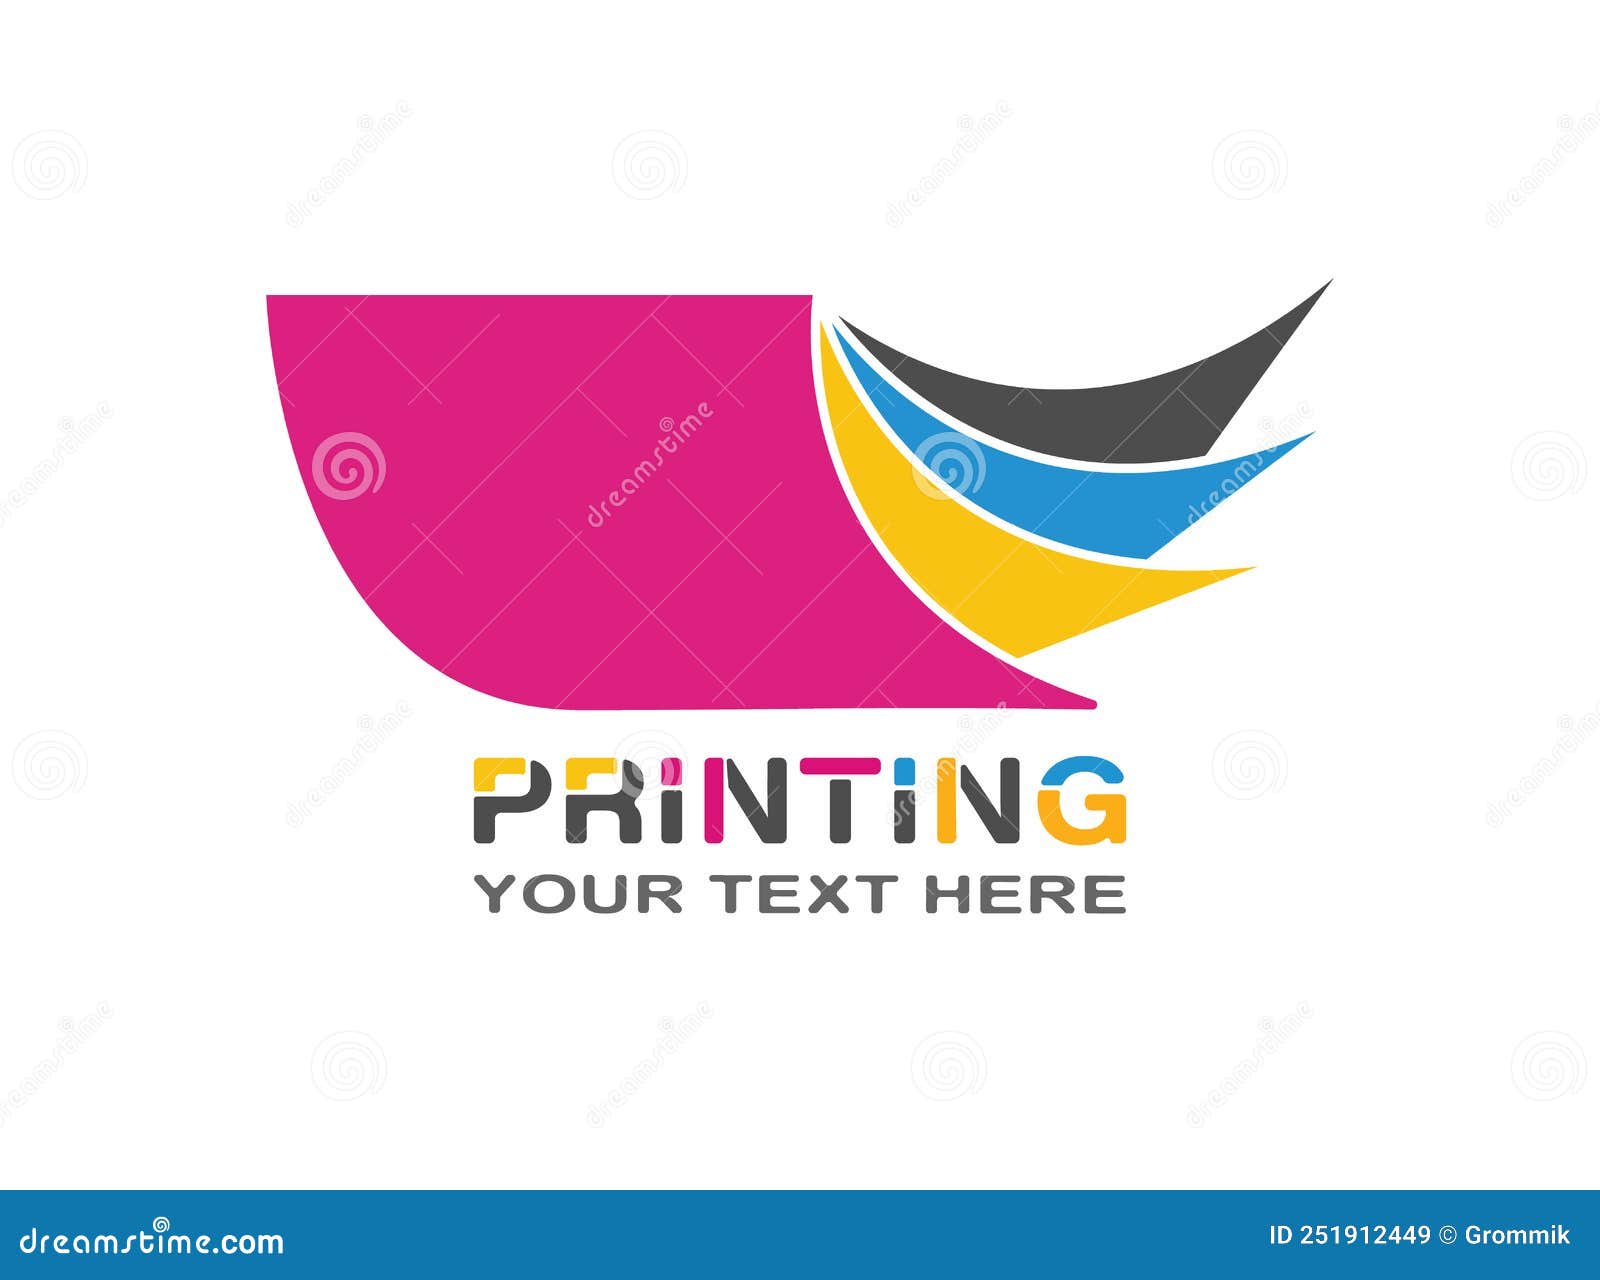 Digital printing template for a logo sticker Vector Image